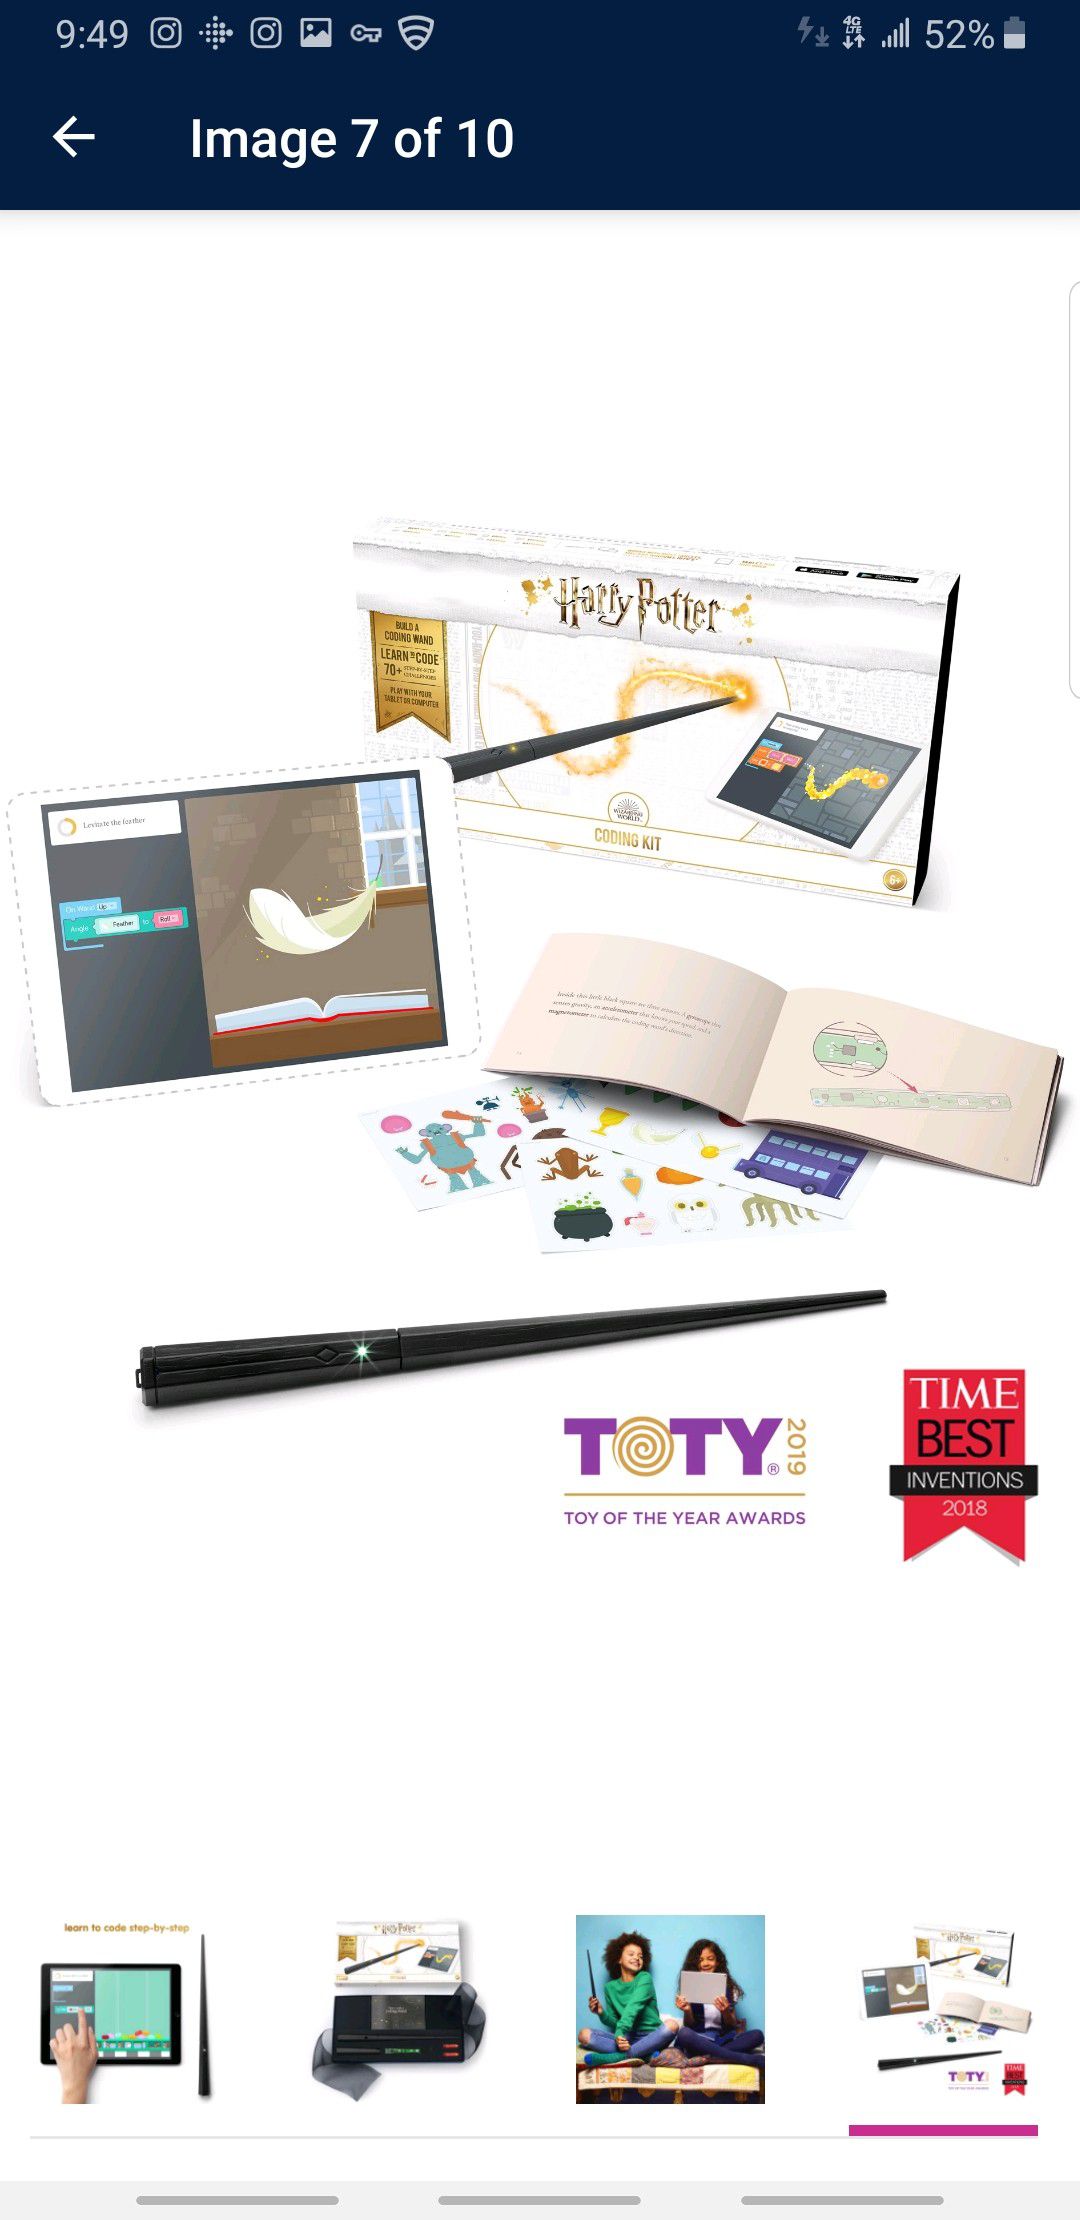 Harry Potter Coding Kit Build a Wand, Learn To Code & Make Magic.